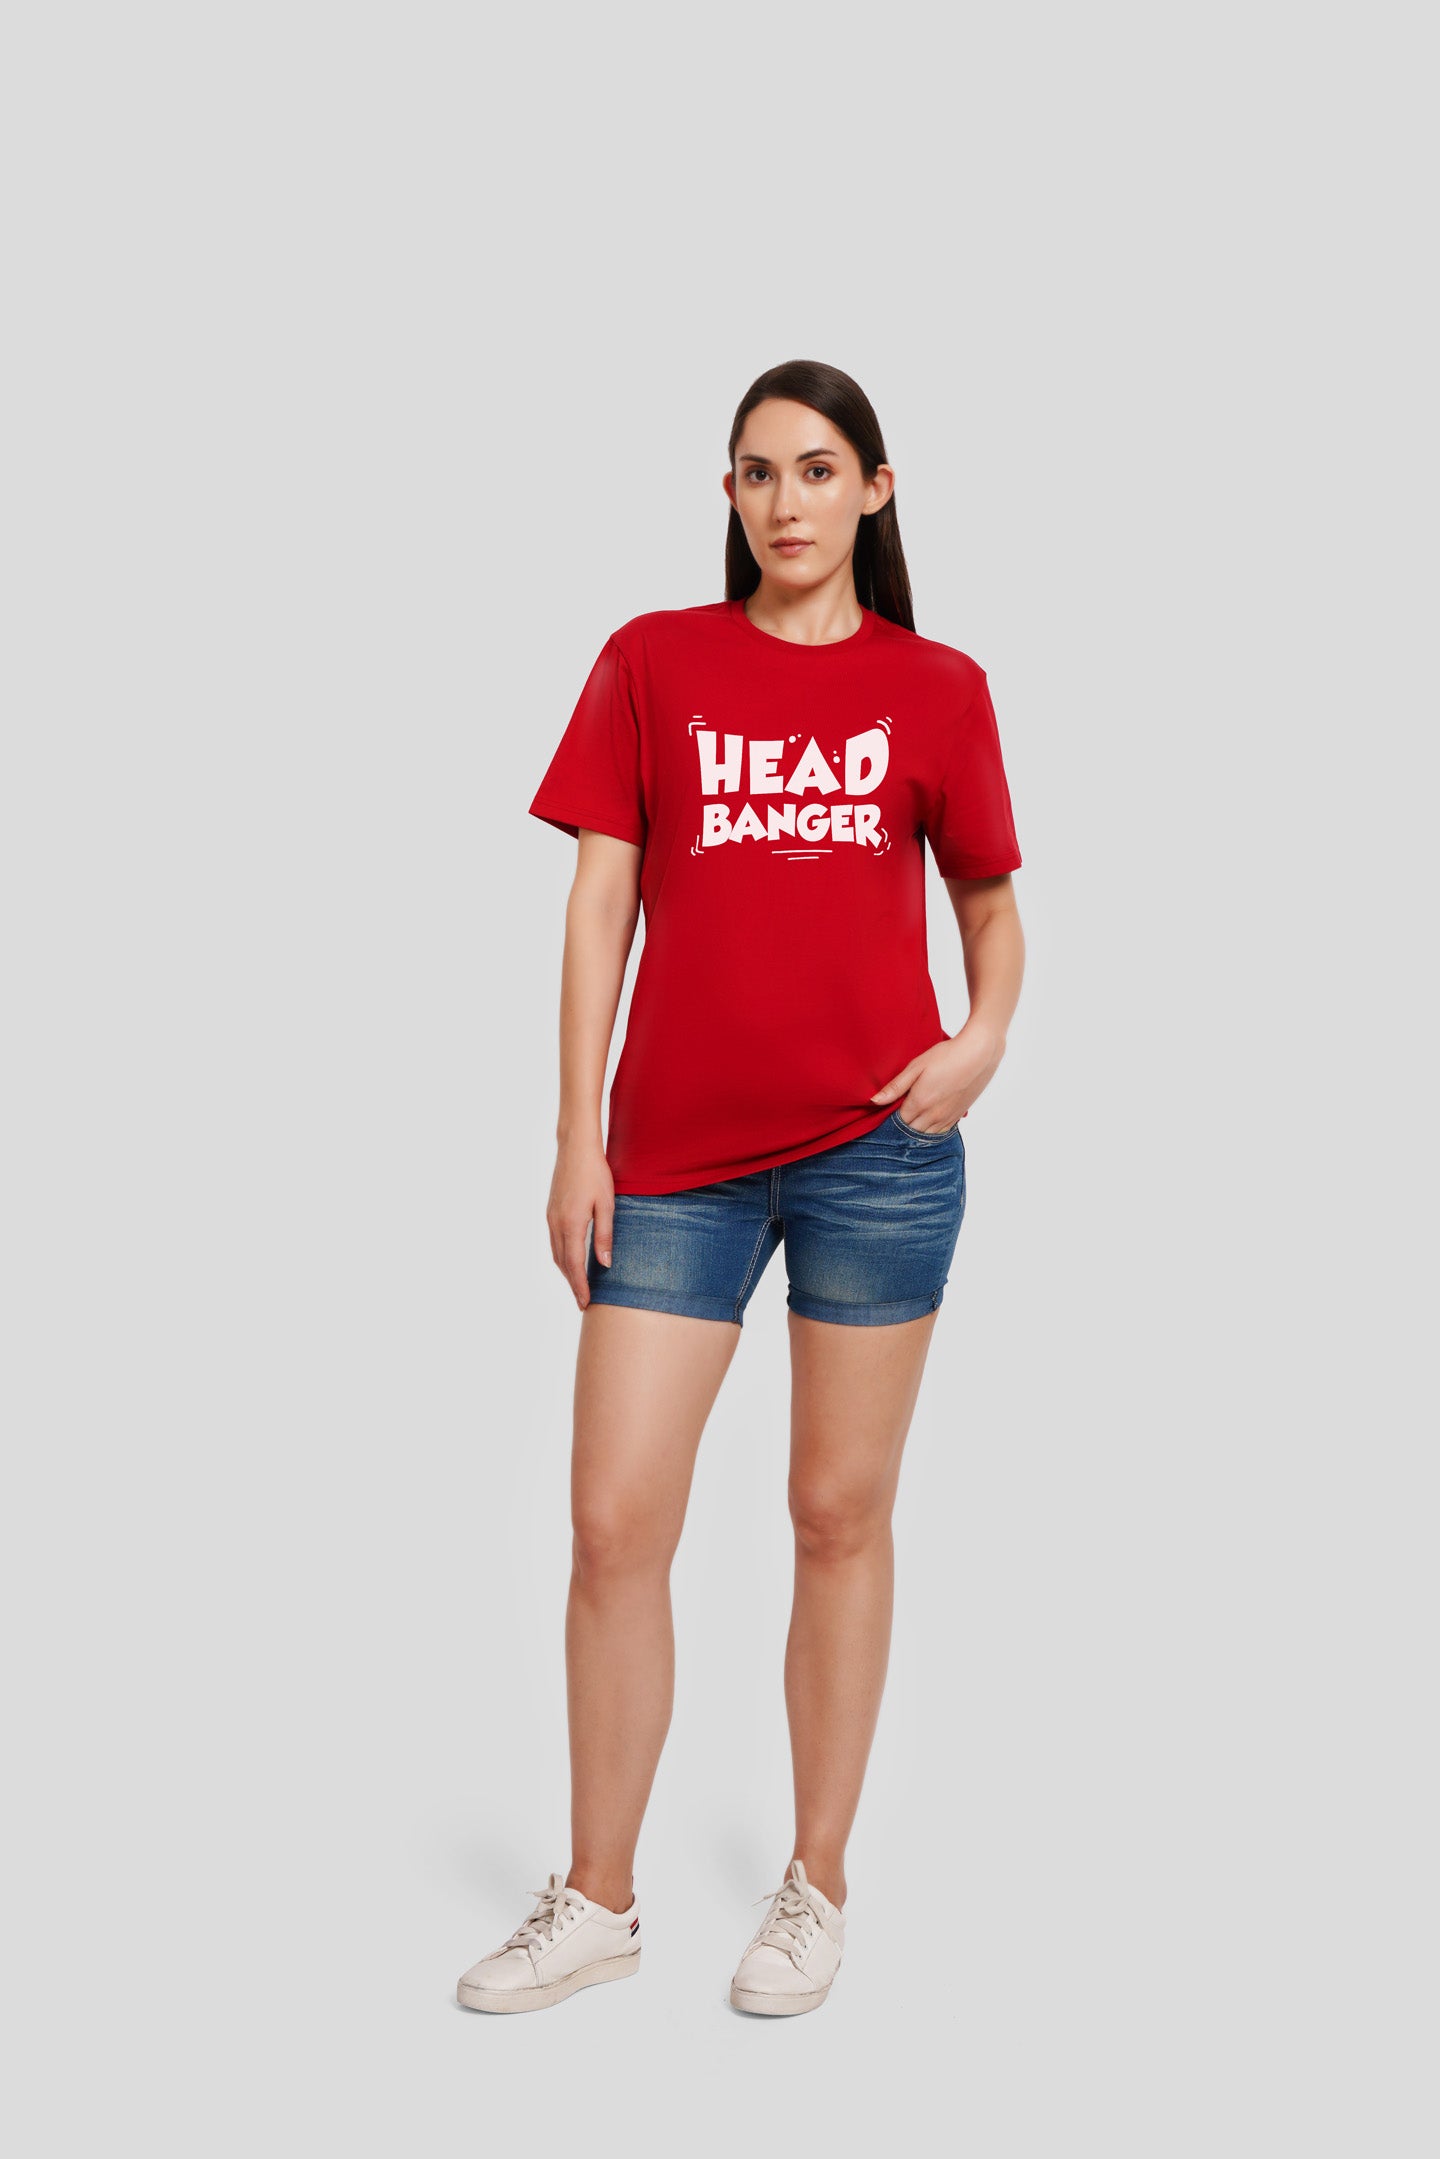 Head Banger Red Printed T Shirt Women Boyfriend Fit With Front Design Pic 3